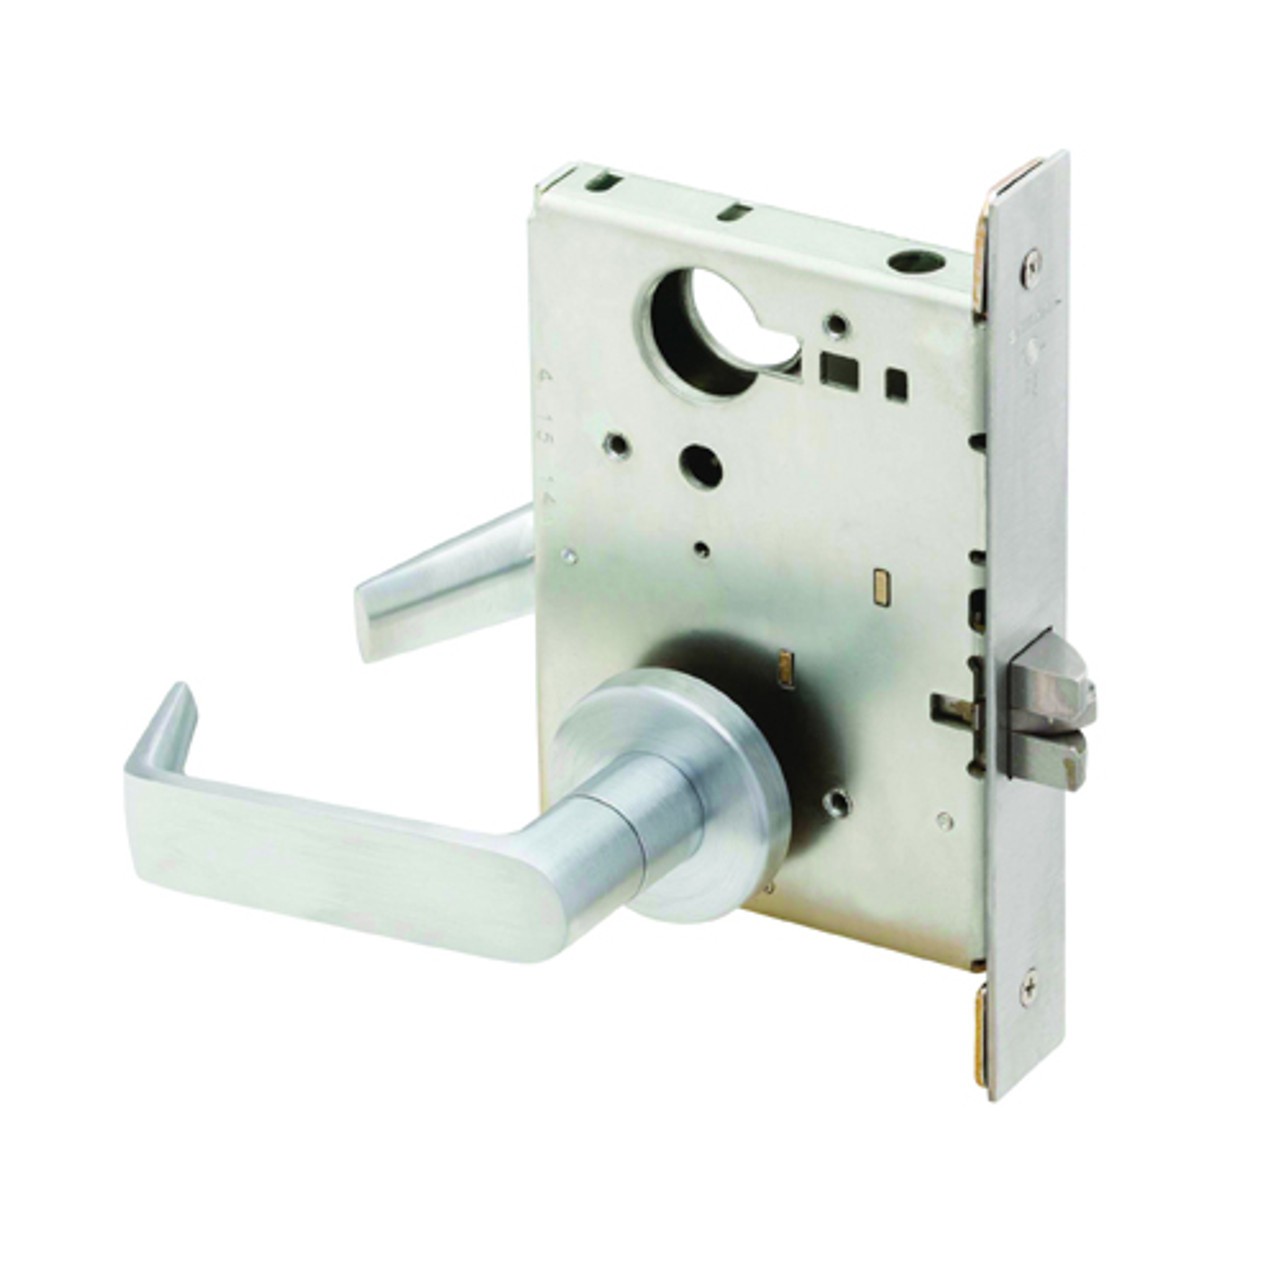 L9010-06A-613 Schlage L Series Passage Latch Commercial Mortise Lock with 06 Cast Lever Design in Oil Rubbed Bronze